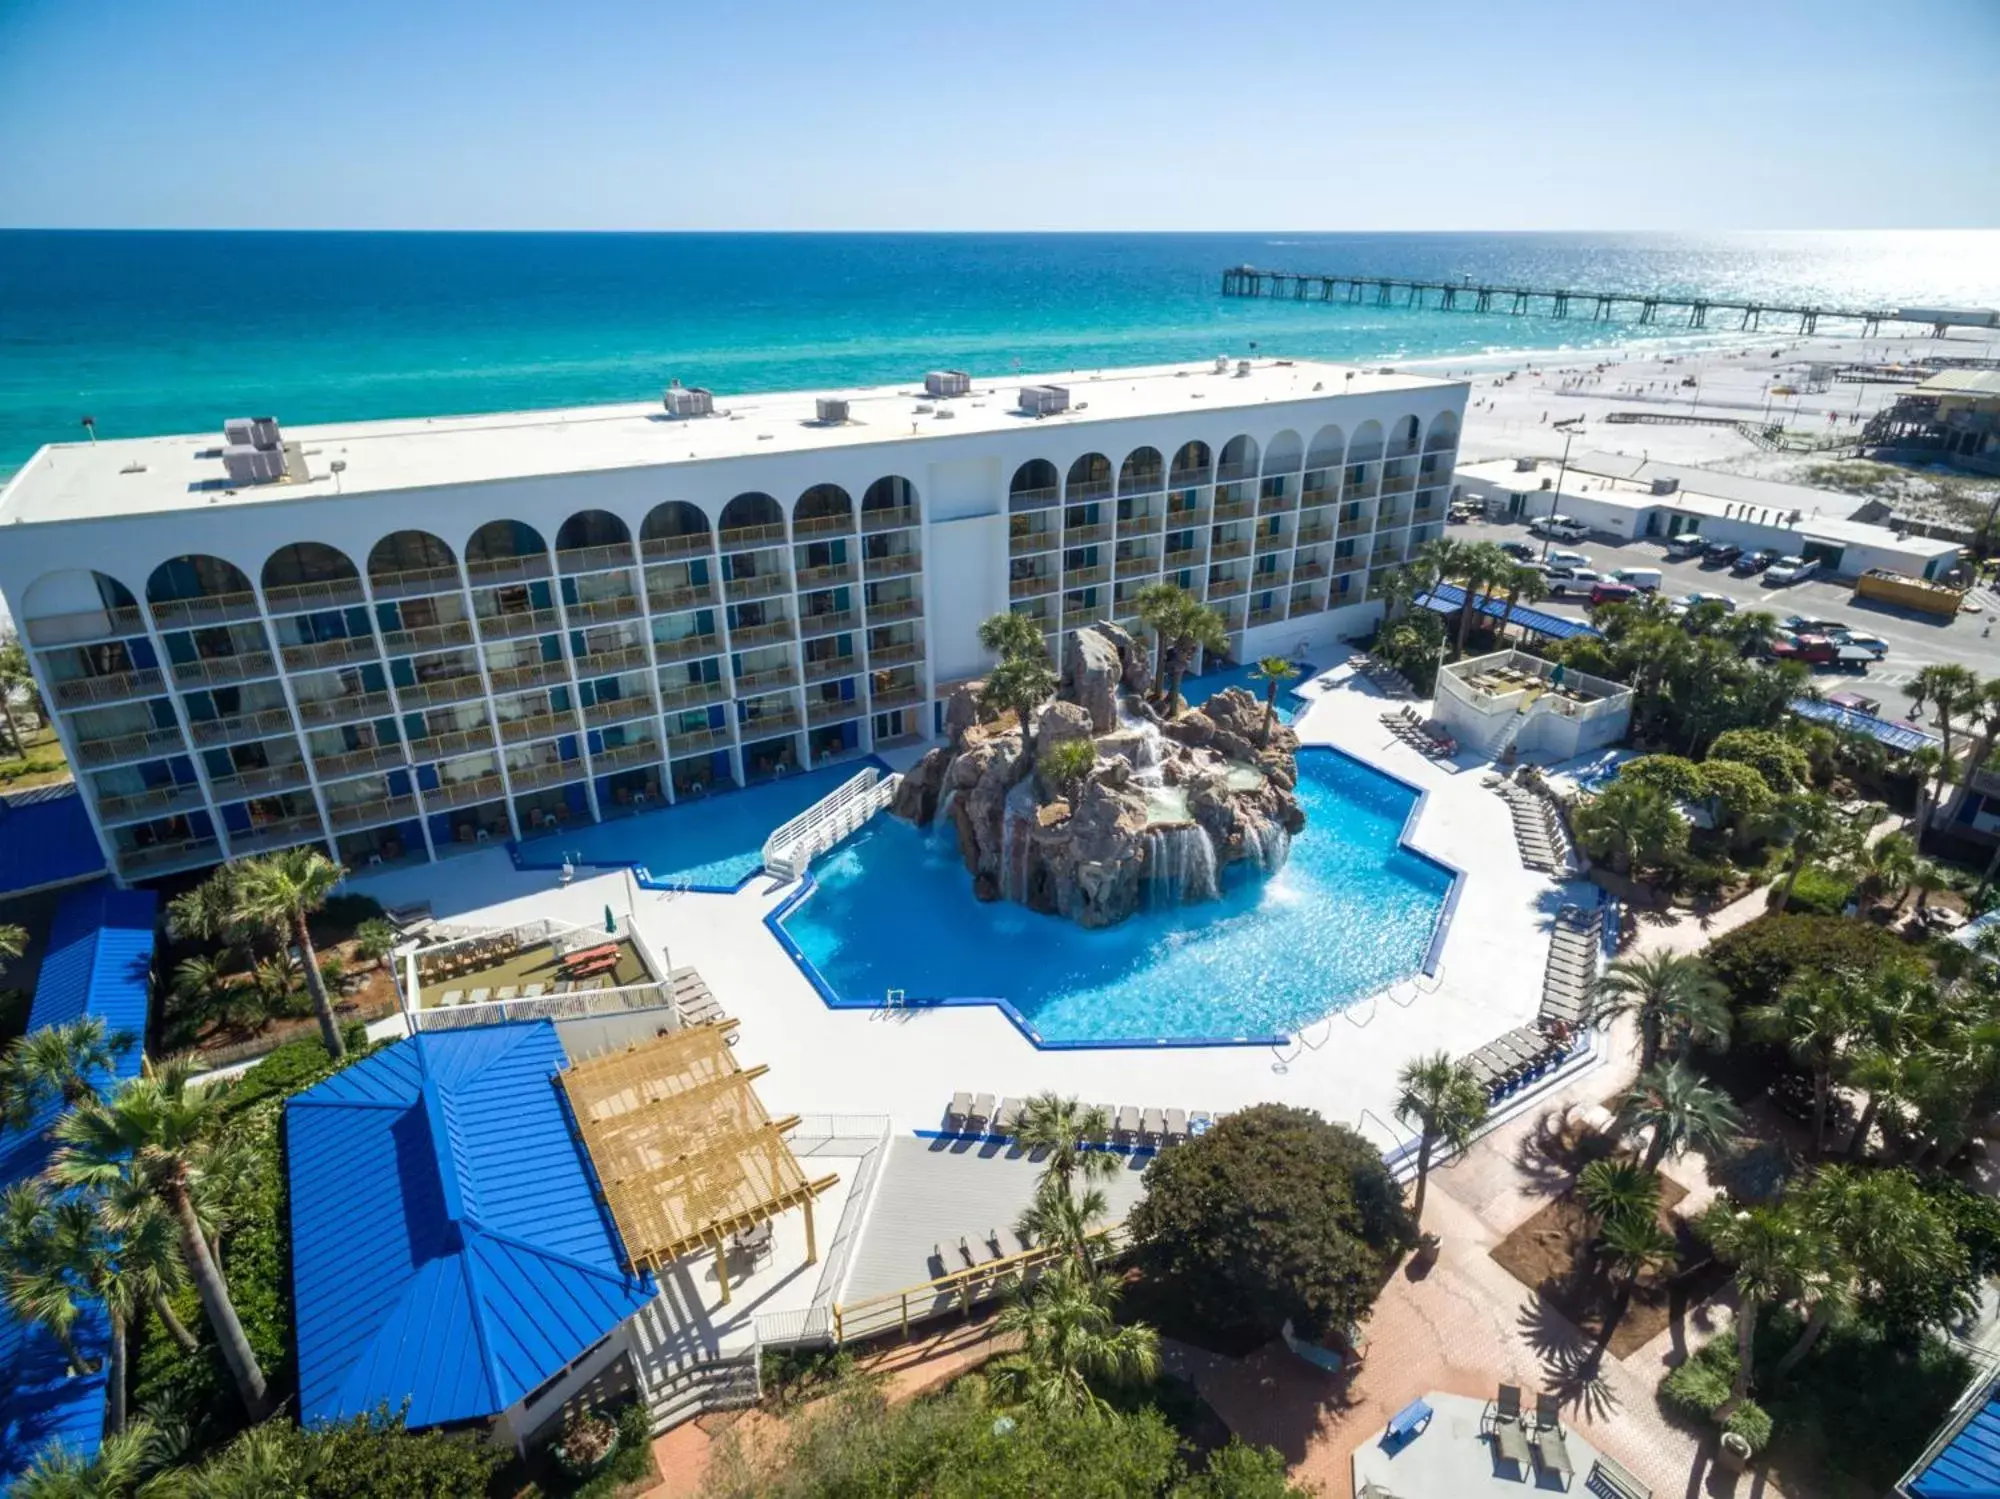 Property building, Pool View in The Island Resort at Fort Walton Beach